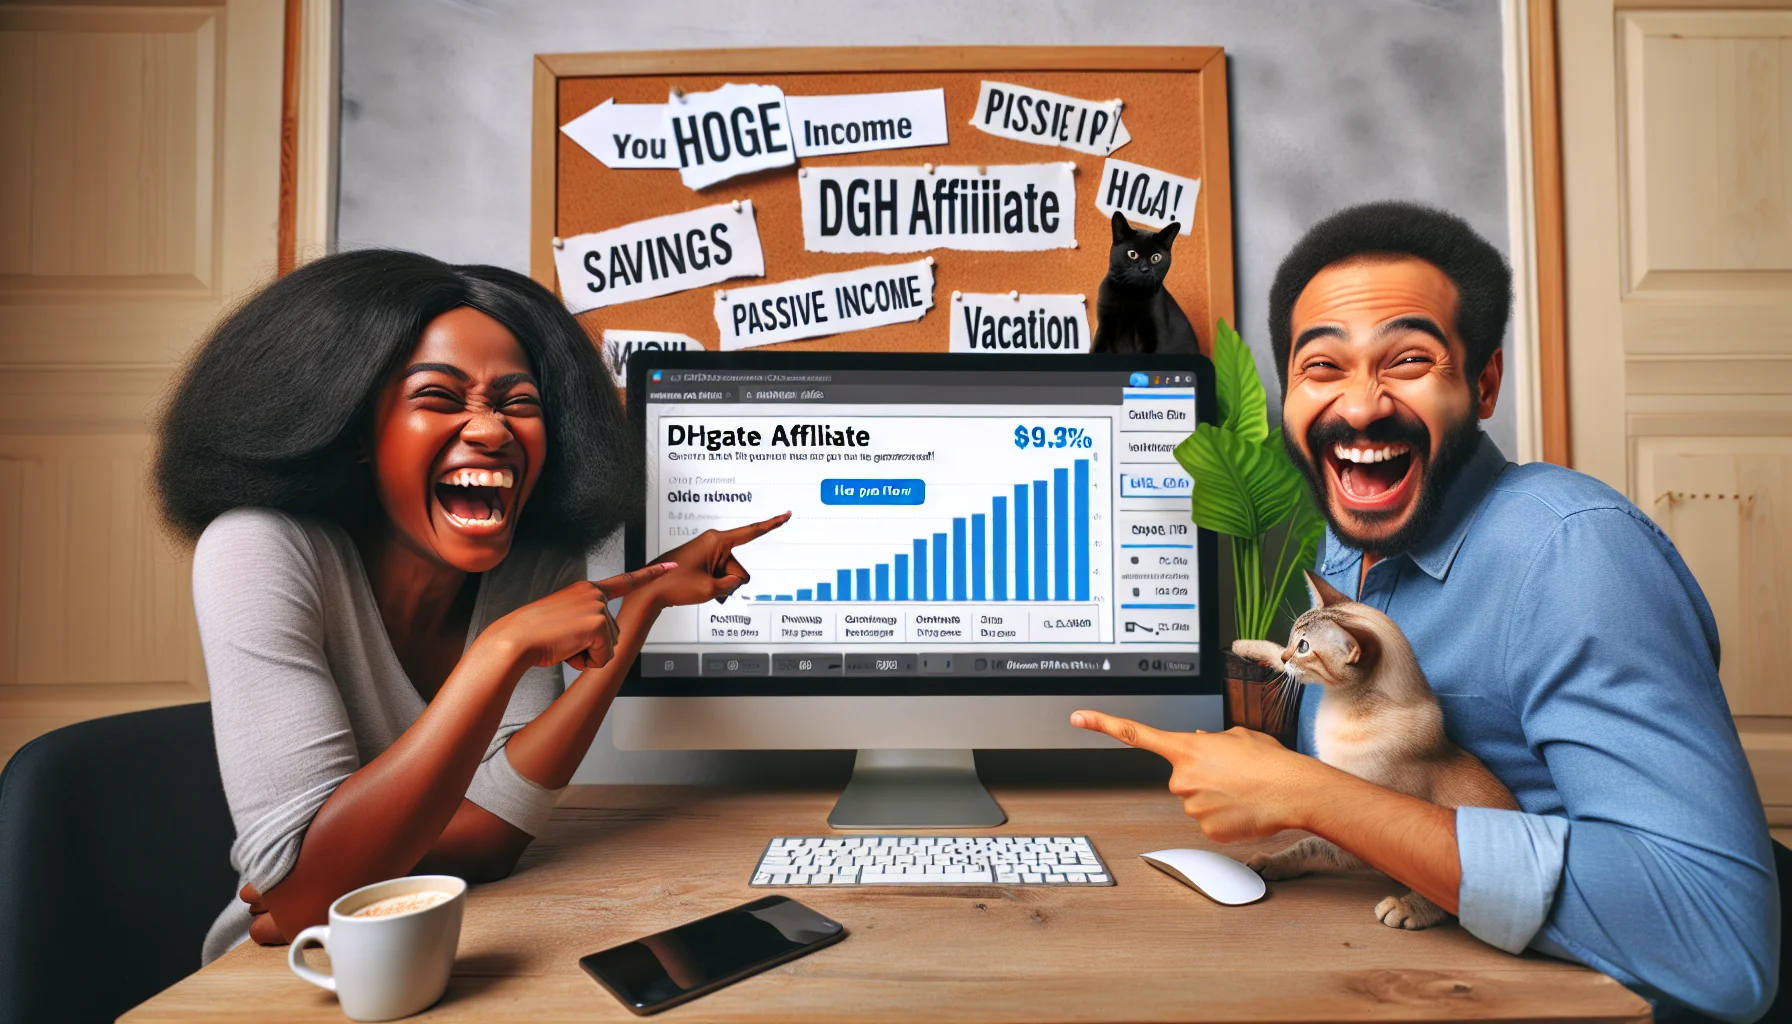 Create a humorous and realistic scene depicting a woman of black descent and man of Hispanic descent laughing and pointing at a computer screen that's showcasing a huge increase in generated profits. They are in a casual home office environment with a plant and coffee mug beside the computer. A program on the screen reads 'DHGate Affiliate'. On the wall behind them is a DIY vision board with words that represent passive income, savings and vacation. Add a touch of lightheartedness by having a cat trying to catch the on-screen cursor.